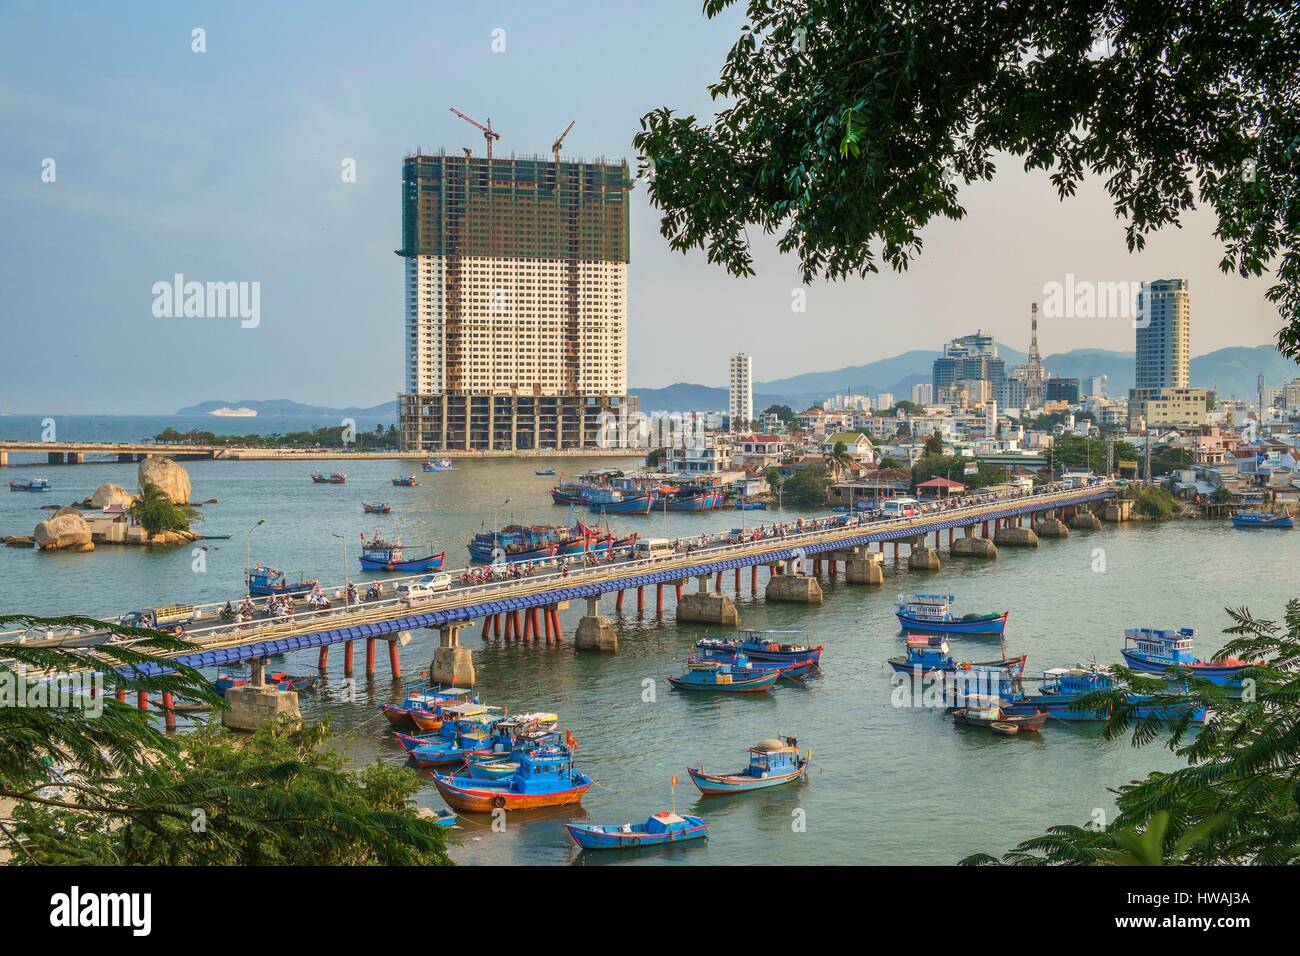 Vietnam, South Central Coast region, Khanh Hoa province, Nha Trang, fishing harbour, Xom Bong bridge and the 48 storeys Muong Thanh hotel under constr Stock Photo